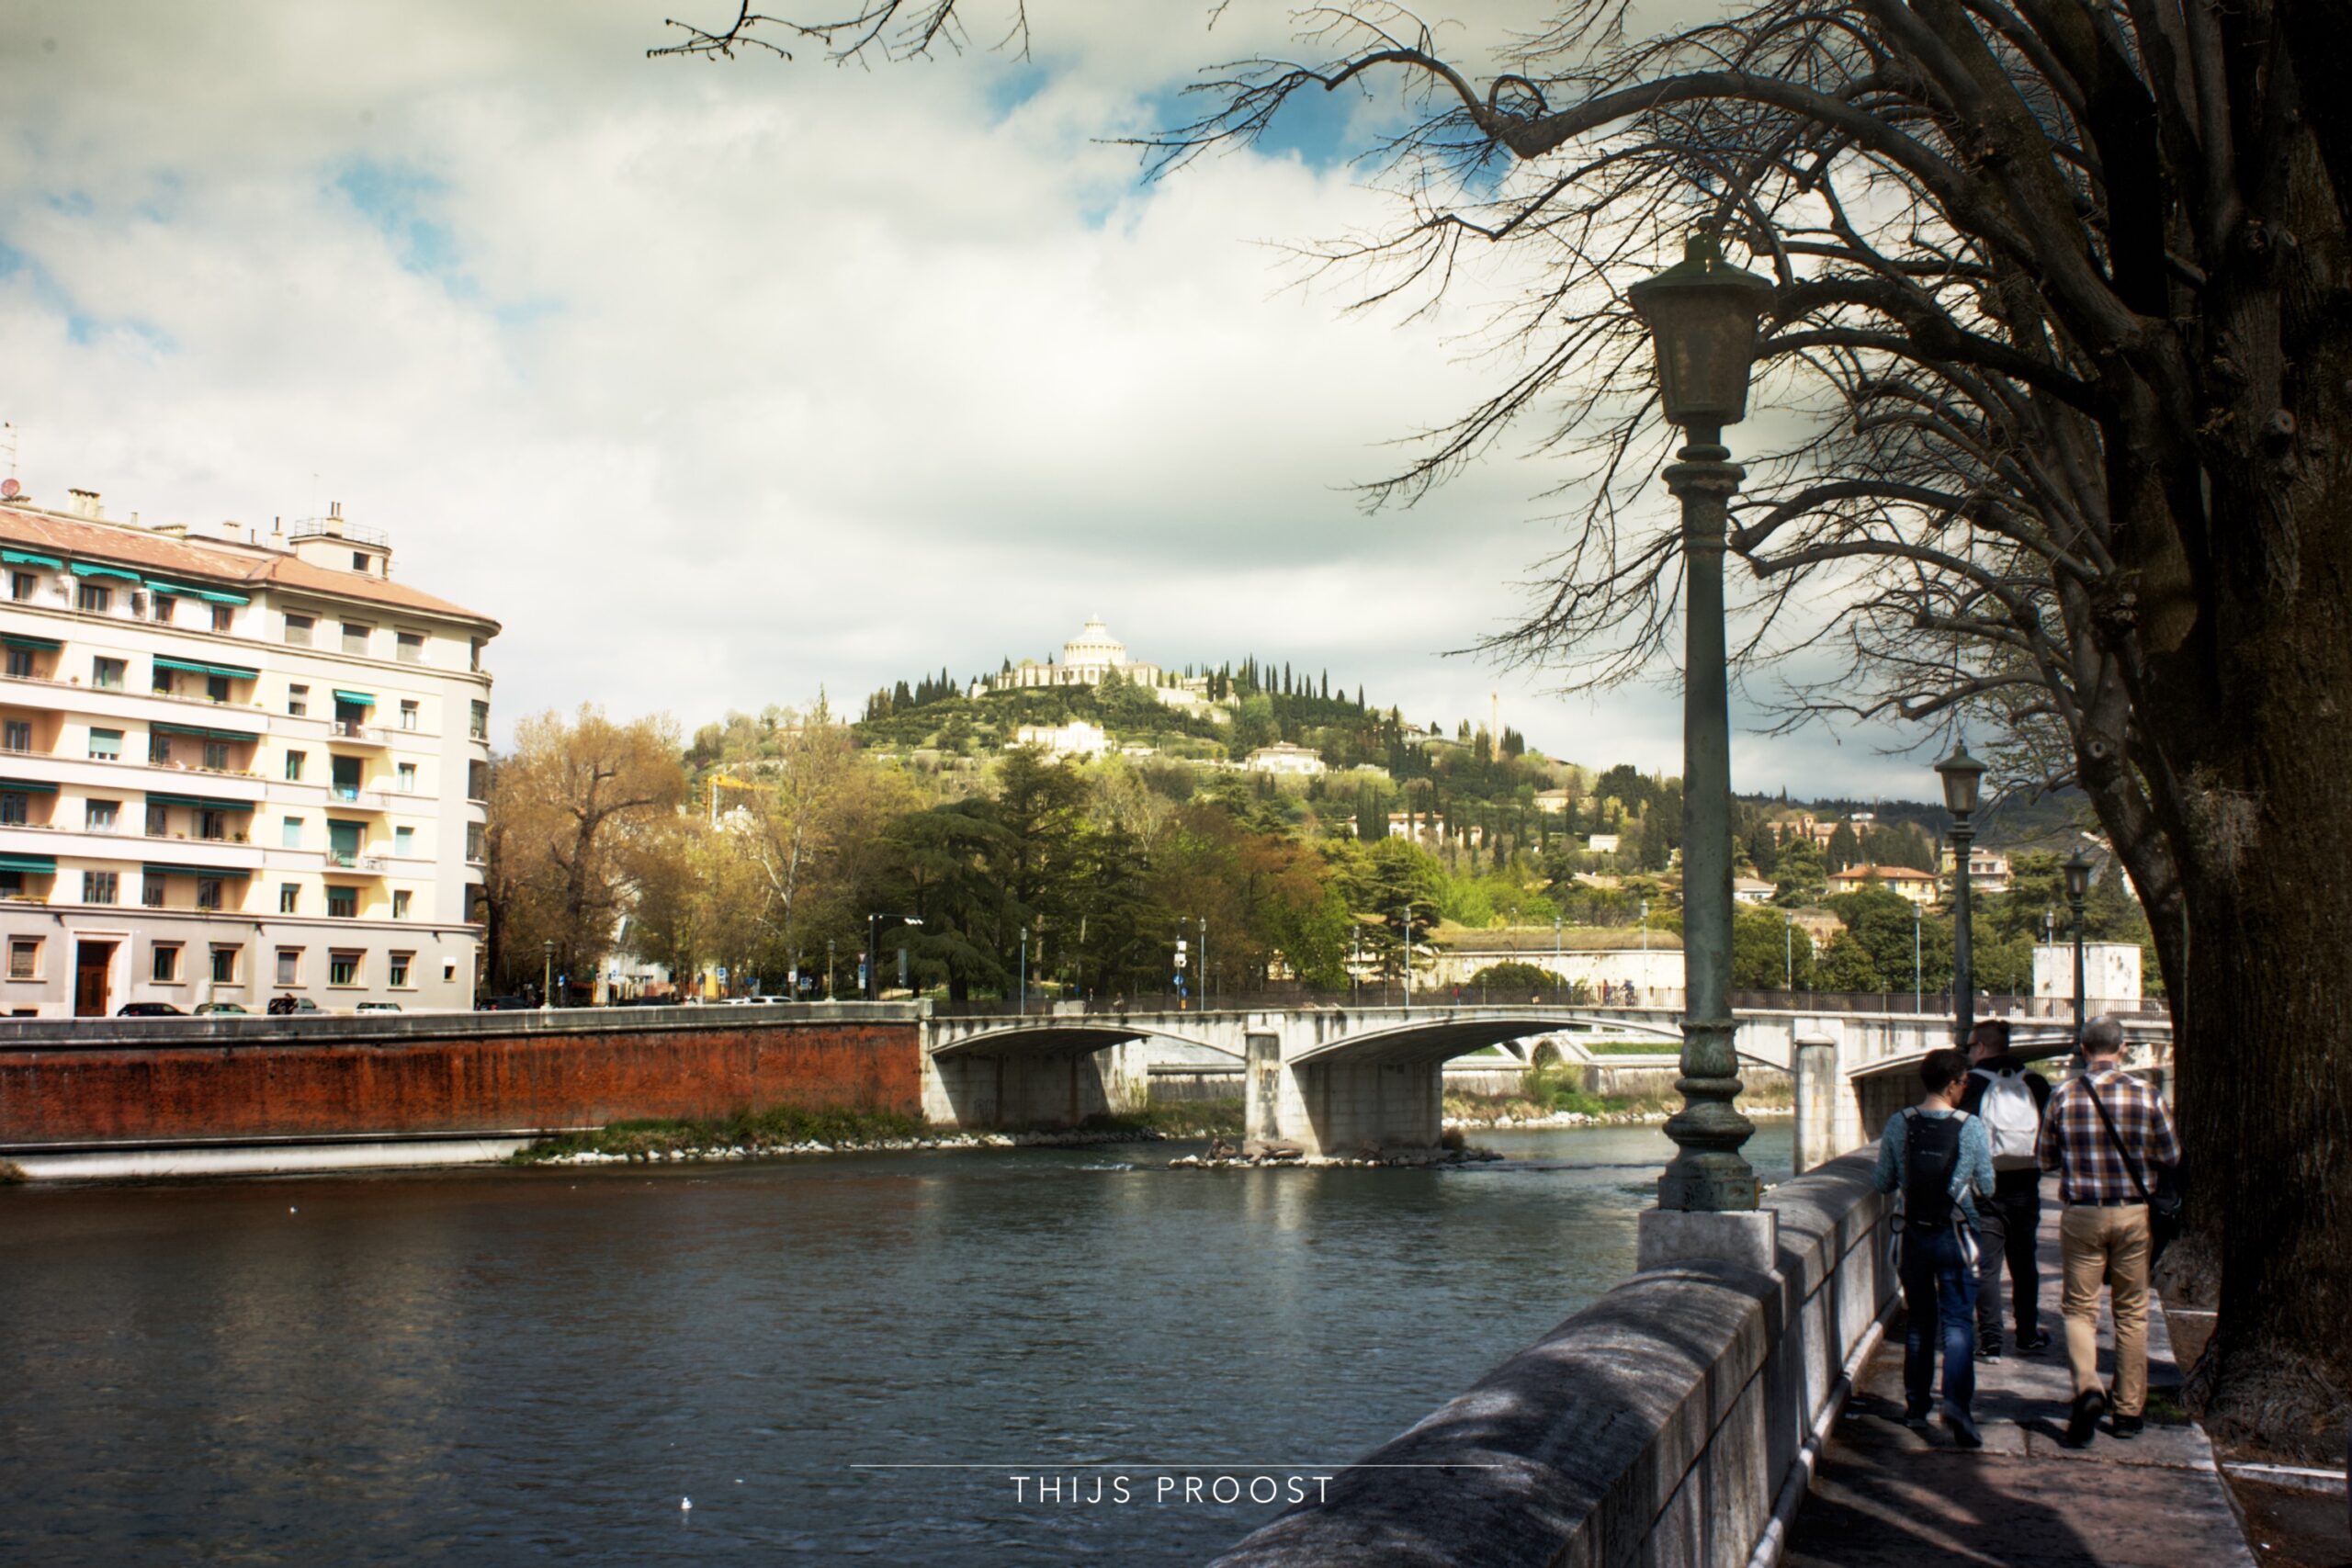 Verona River with tree and view on a hill in the distance. A bridge crosses the river. In front of the tree is a lantern pole.